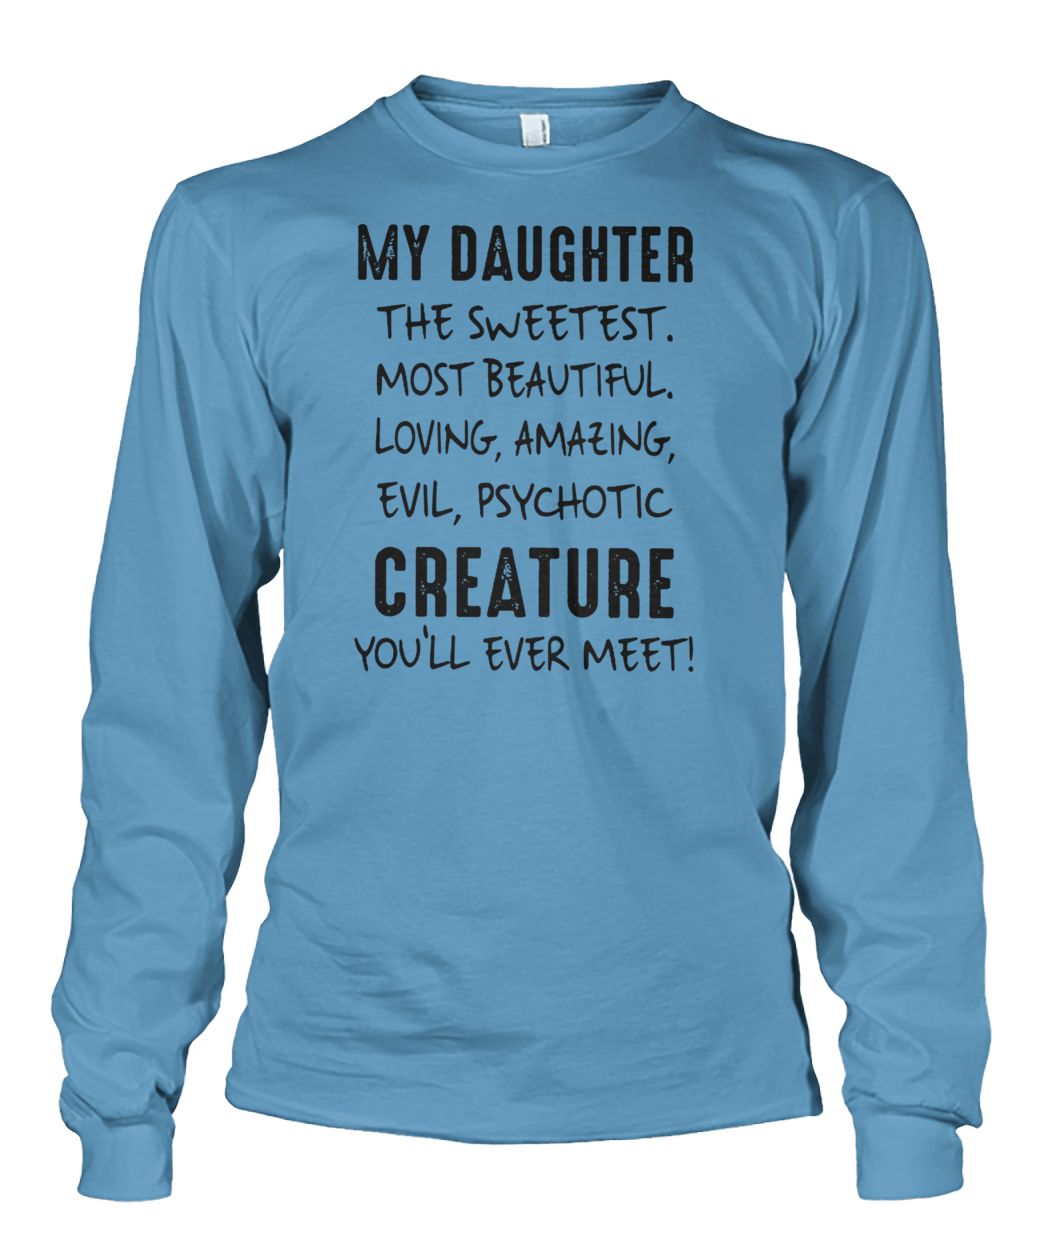 My daughter the sweetest most beautiful loving amazing evil psychotic creature you'll ever meet unisex long sleeve